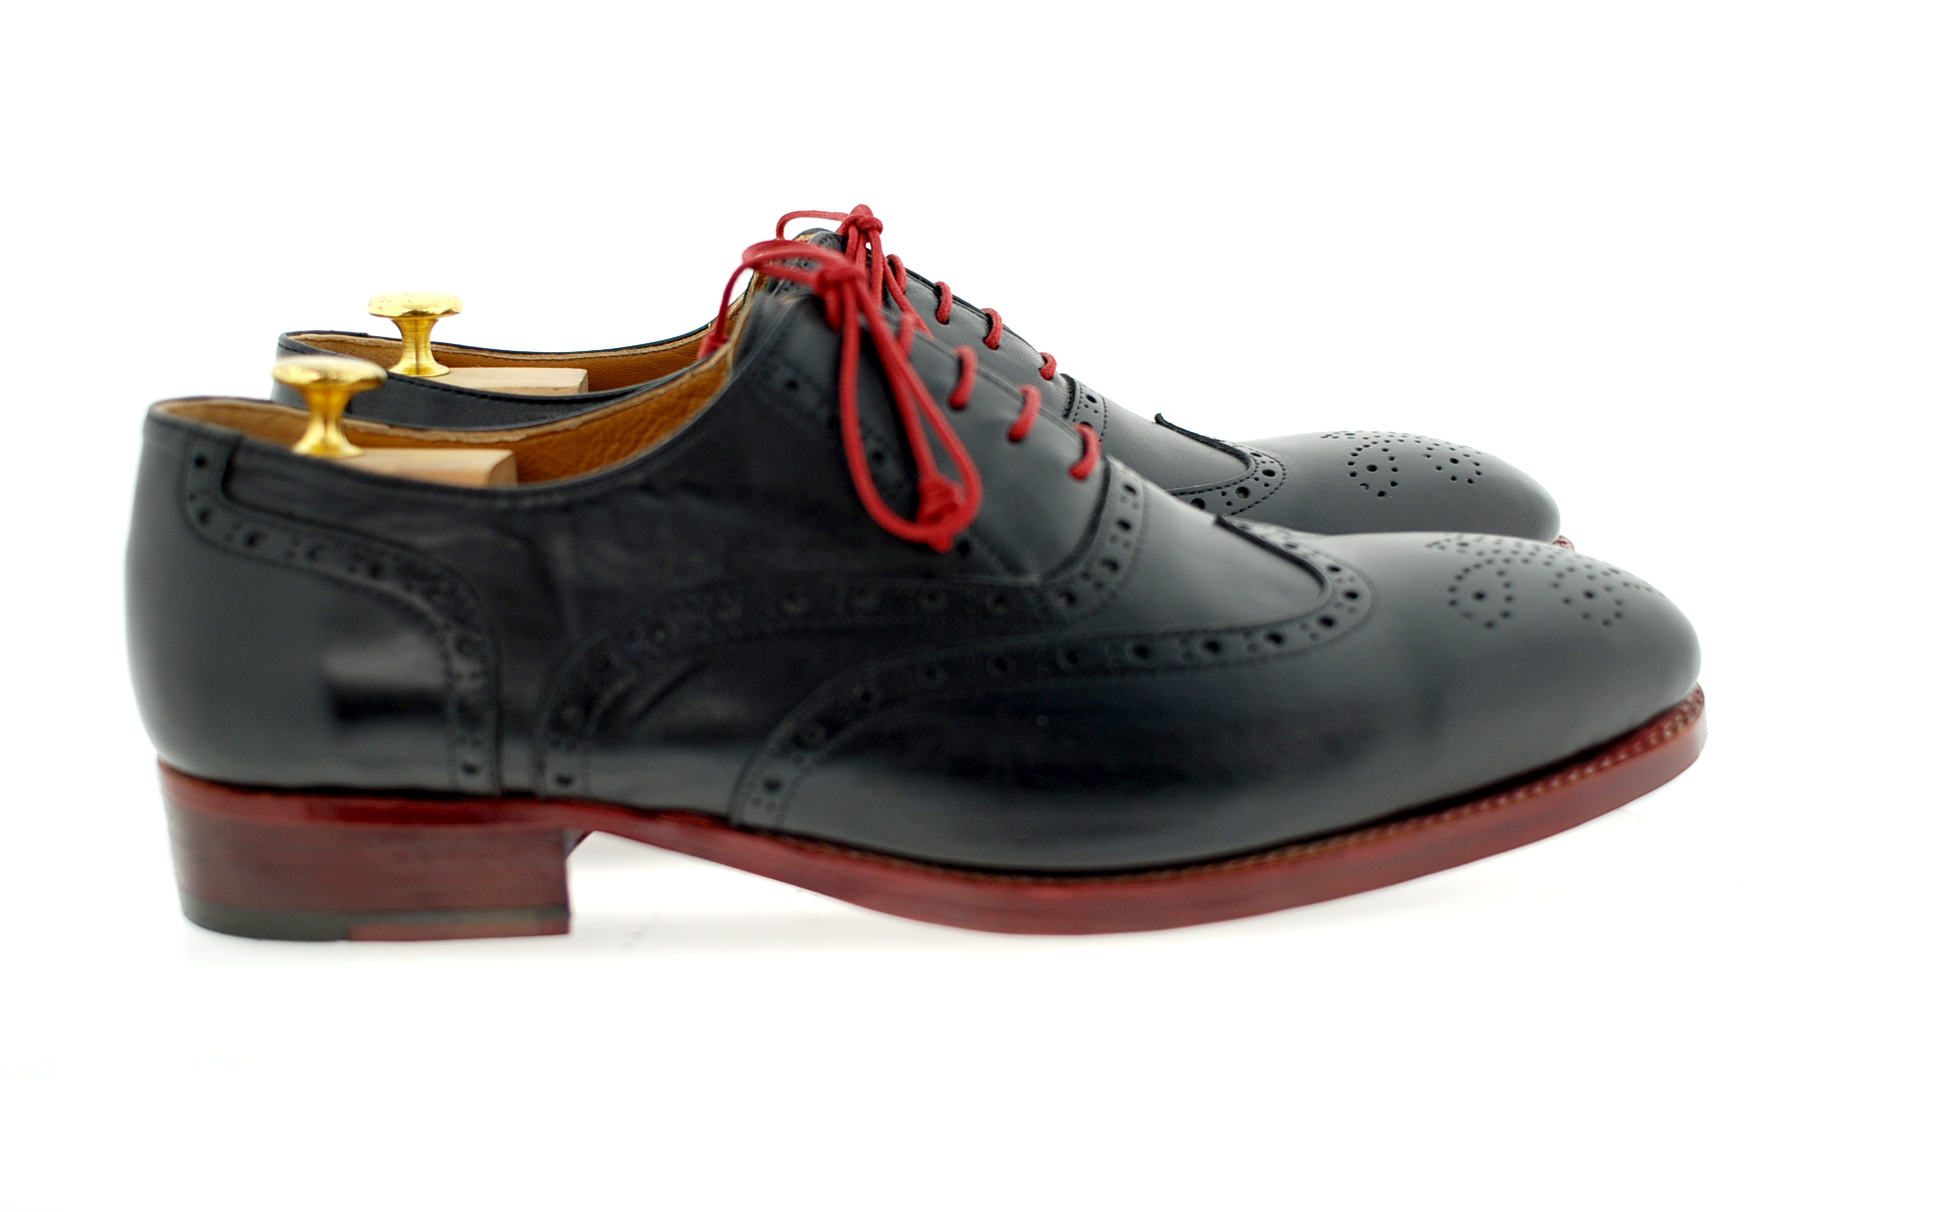 New Oxfords Handmade Luxury Shoes (Rowan) Besopke service available